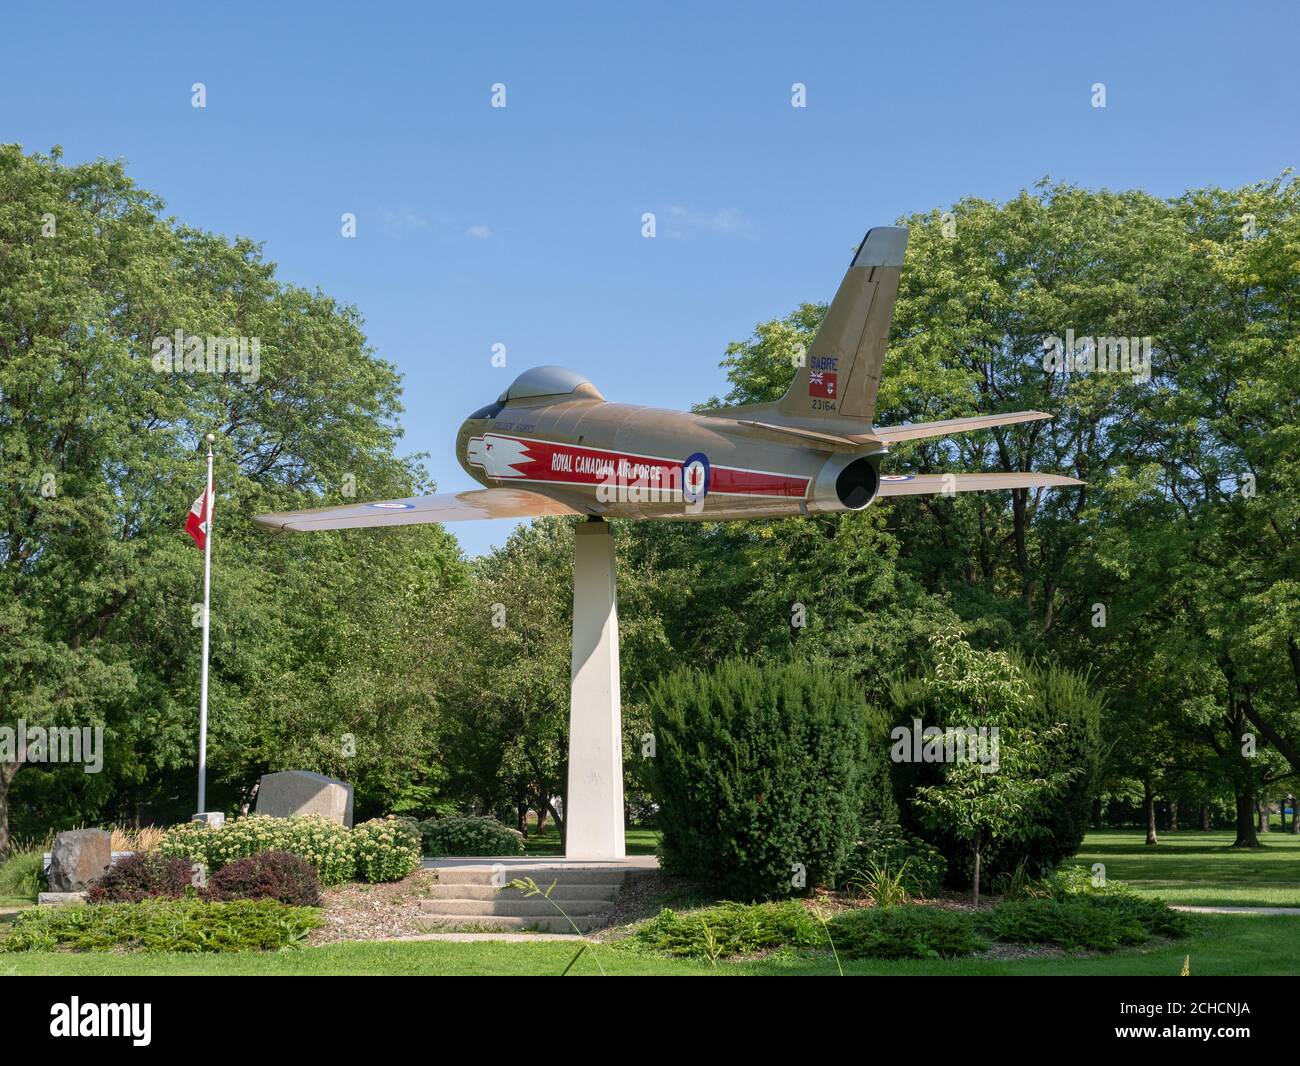 Royal Canadian Air Force Memorial in Germain Park With A F-86 MkV Sabre Golden Hawks Fighter Aerobatics Flying Team Jet Display Aircraft Stock Photo